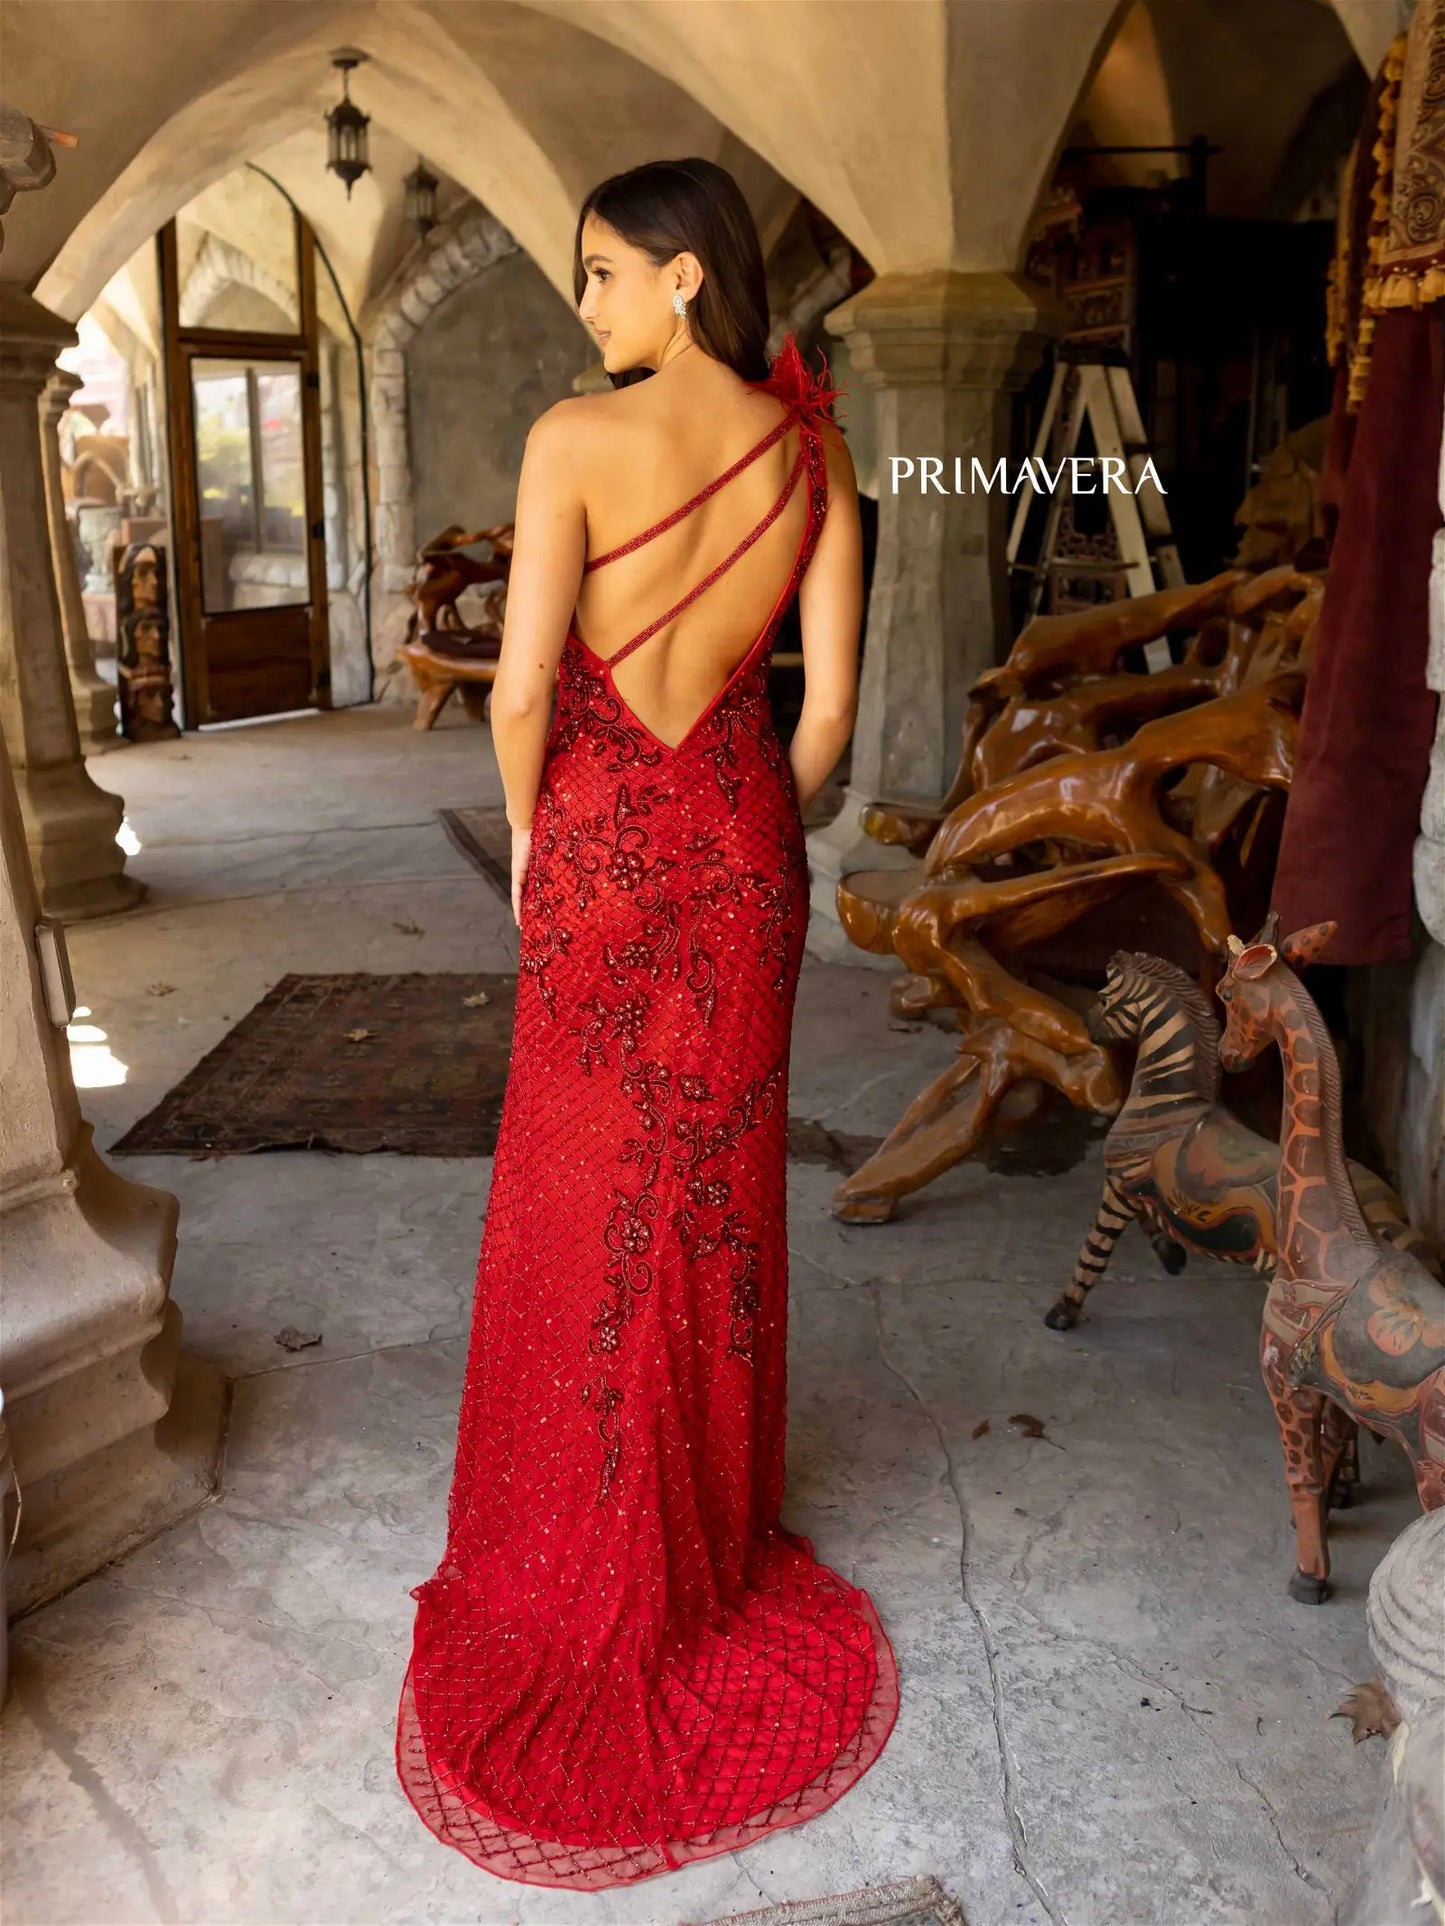 Primavera Couture 3921 Long Fitted Beaded Feather One Shoulder Prom Dress Slit Backless Gown  Sizes: 000-24  Colors: Black, Nude, Red